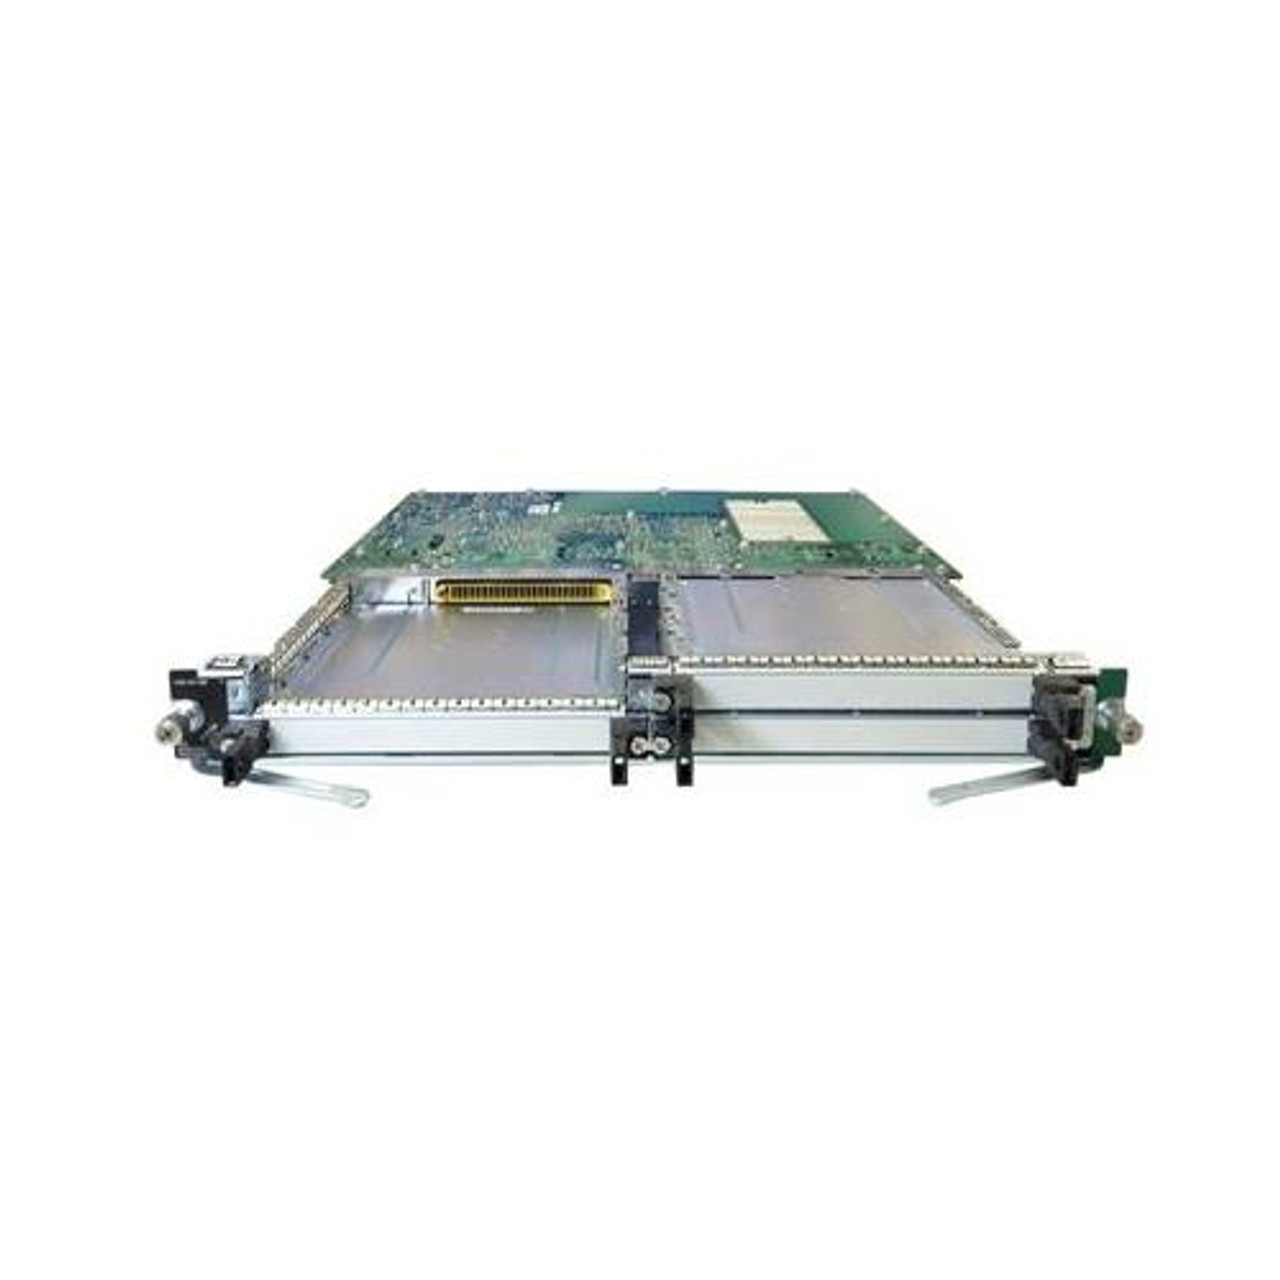 15454E-MRP-1-50.1= Cisco Multi-Rate Txp 100M-2.5G 100G 4ch 1550.12-1552.52 Protected (Refurbished)